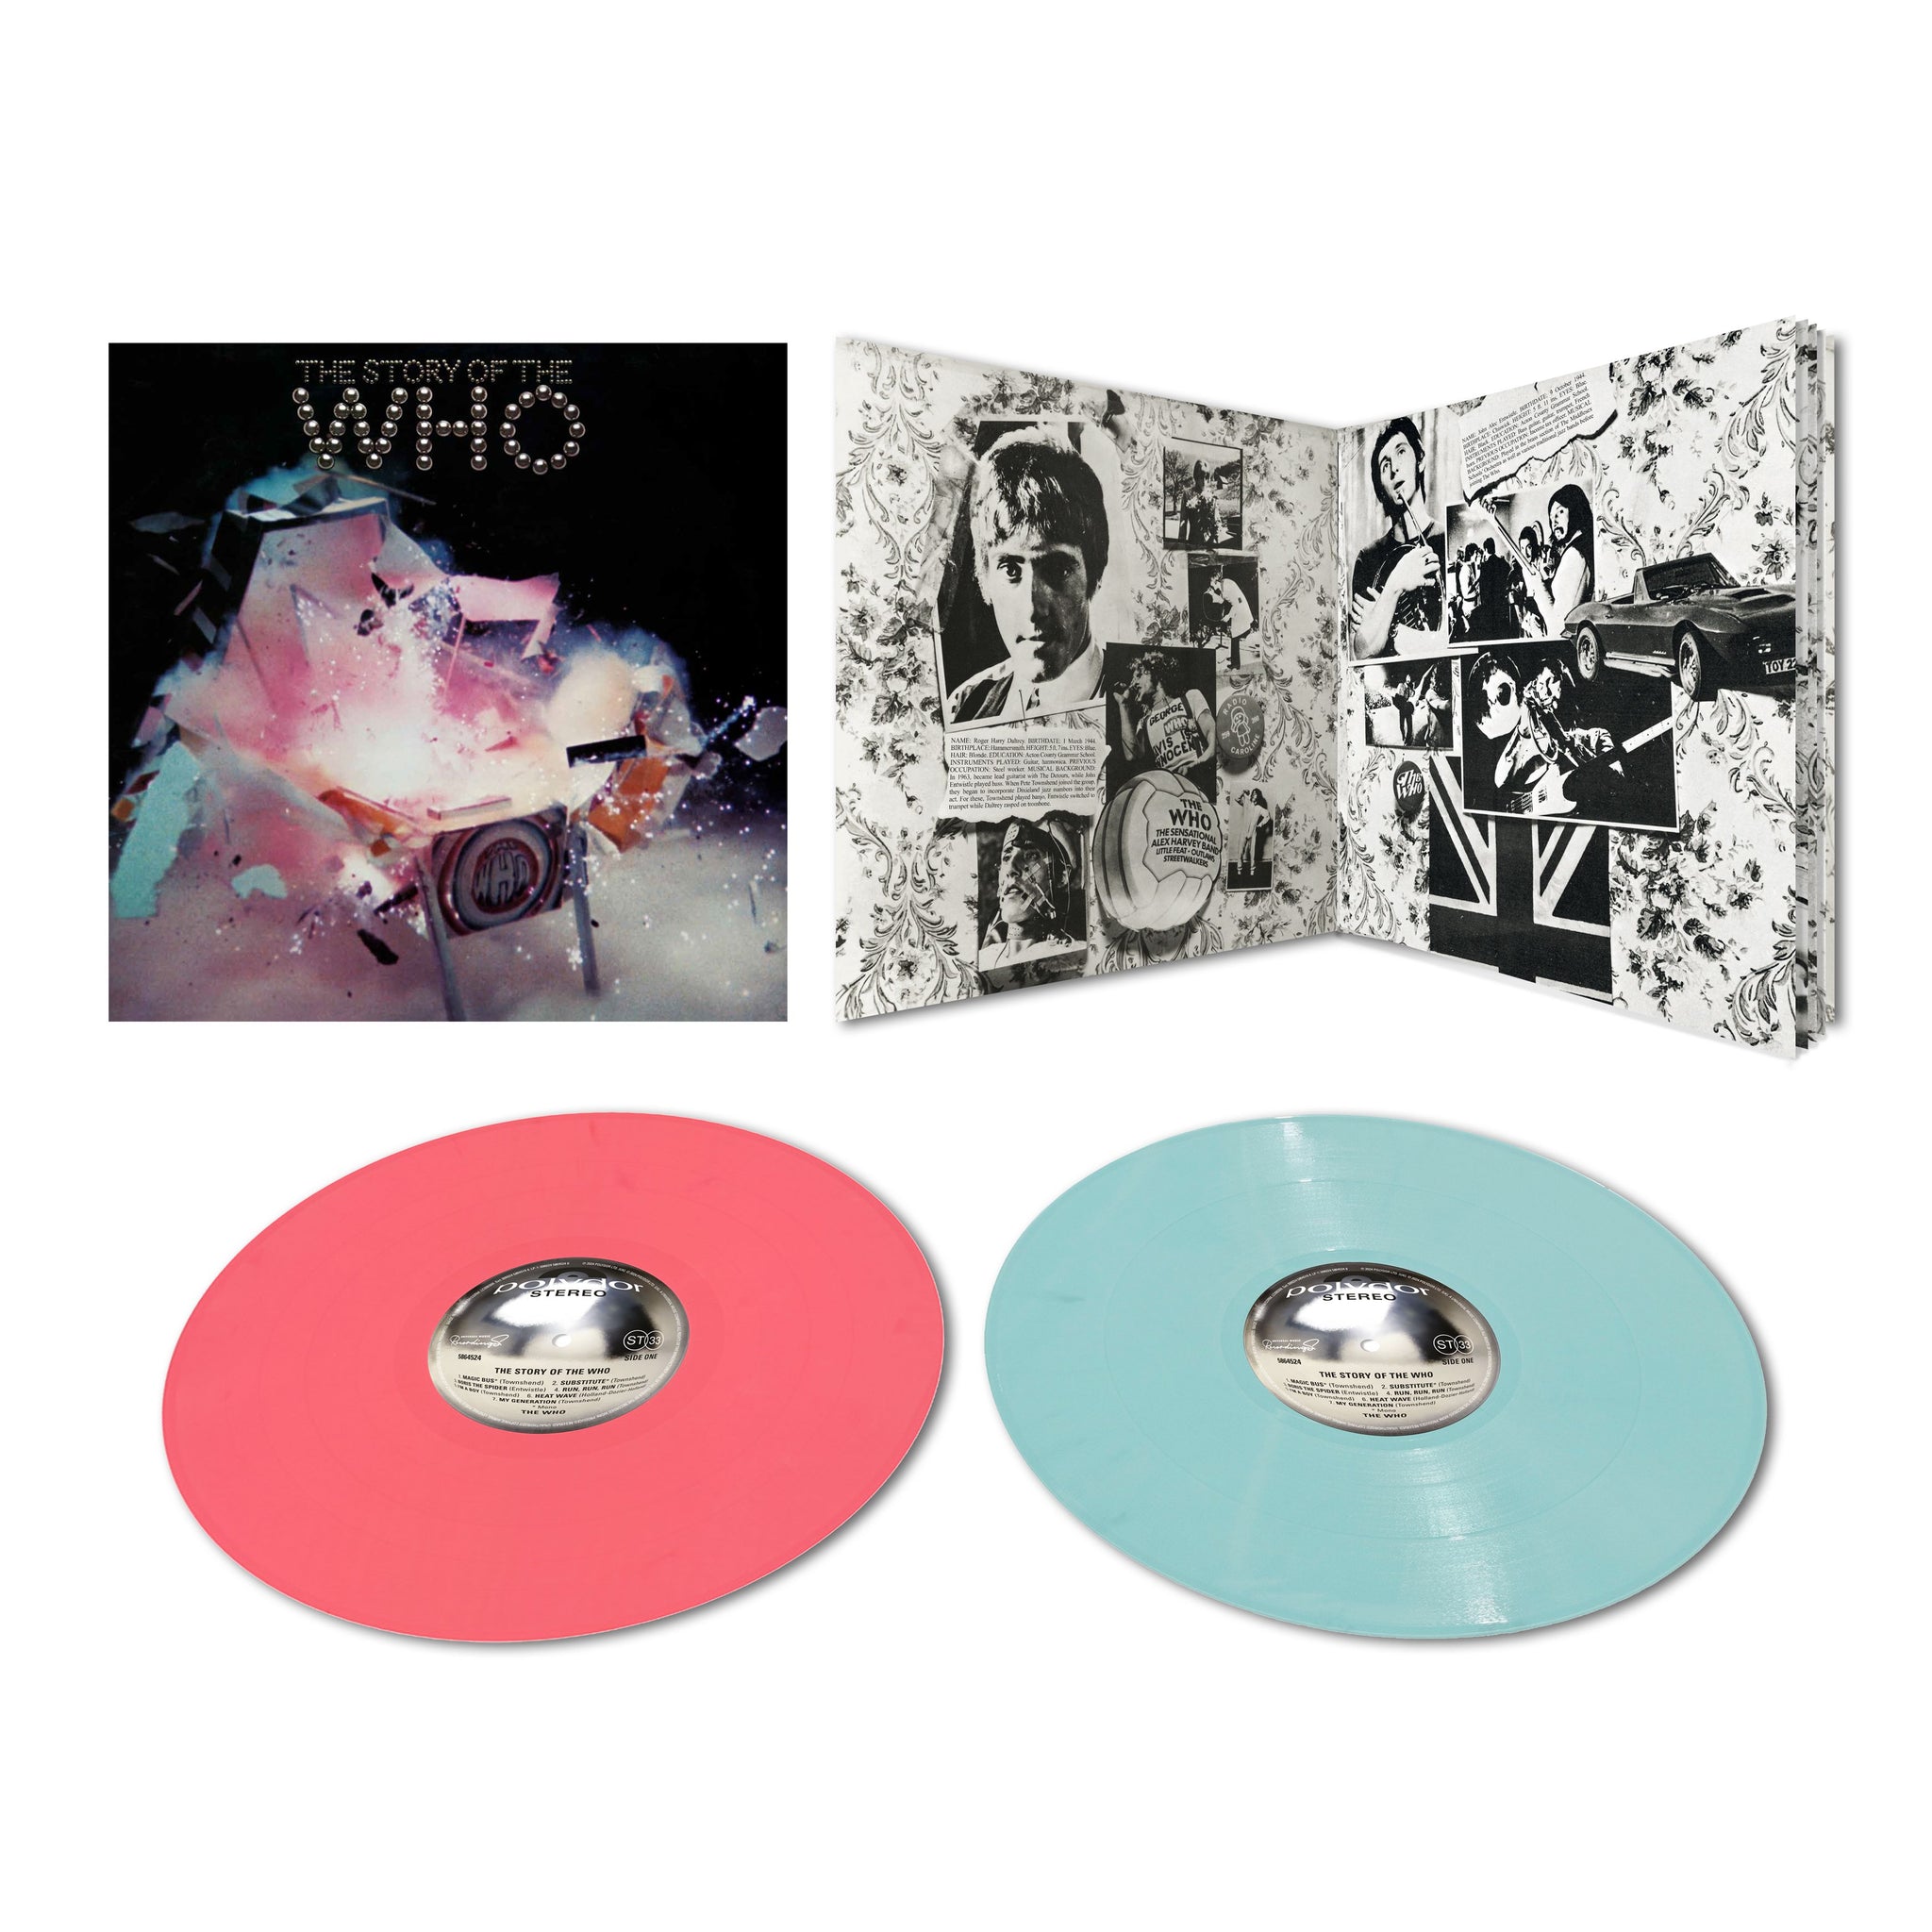 THE WHO - Story Of The Who - 2 LP - Pink and Green Vinyl [RSD 2024]